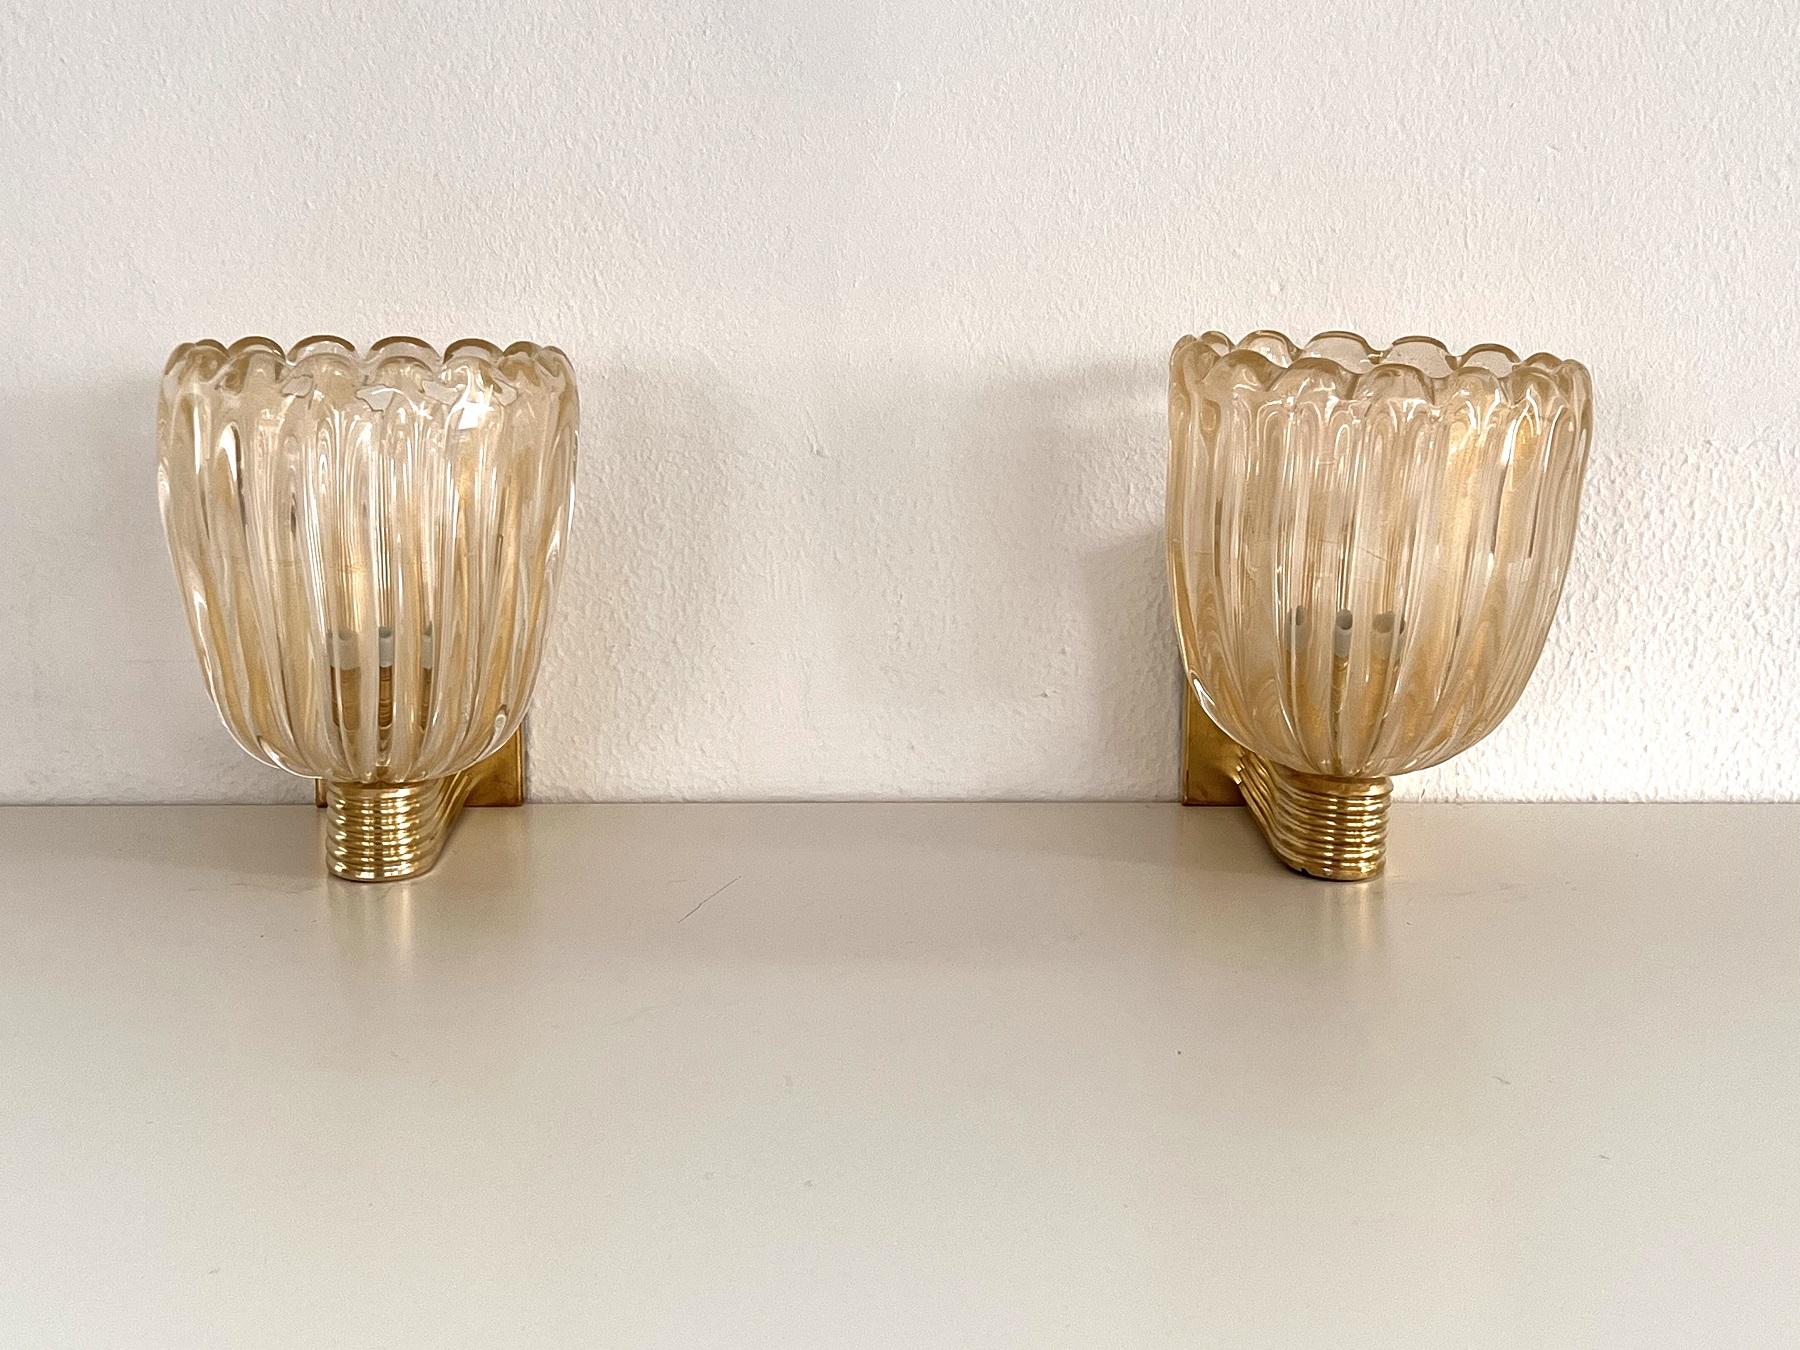 Beautiful set of two gorgeous brass wall lamps made of strong brass base and transparent thick Murano glasses with golden shimmer/glitter inside the glass. Art Deco style.
The beautiful hand-crafted glasses have a slight wave shape and few small air